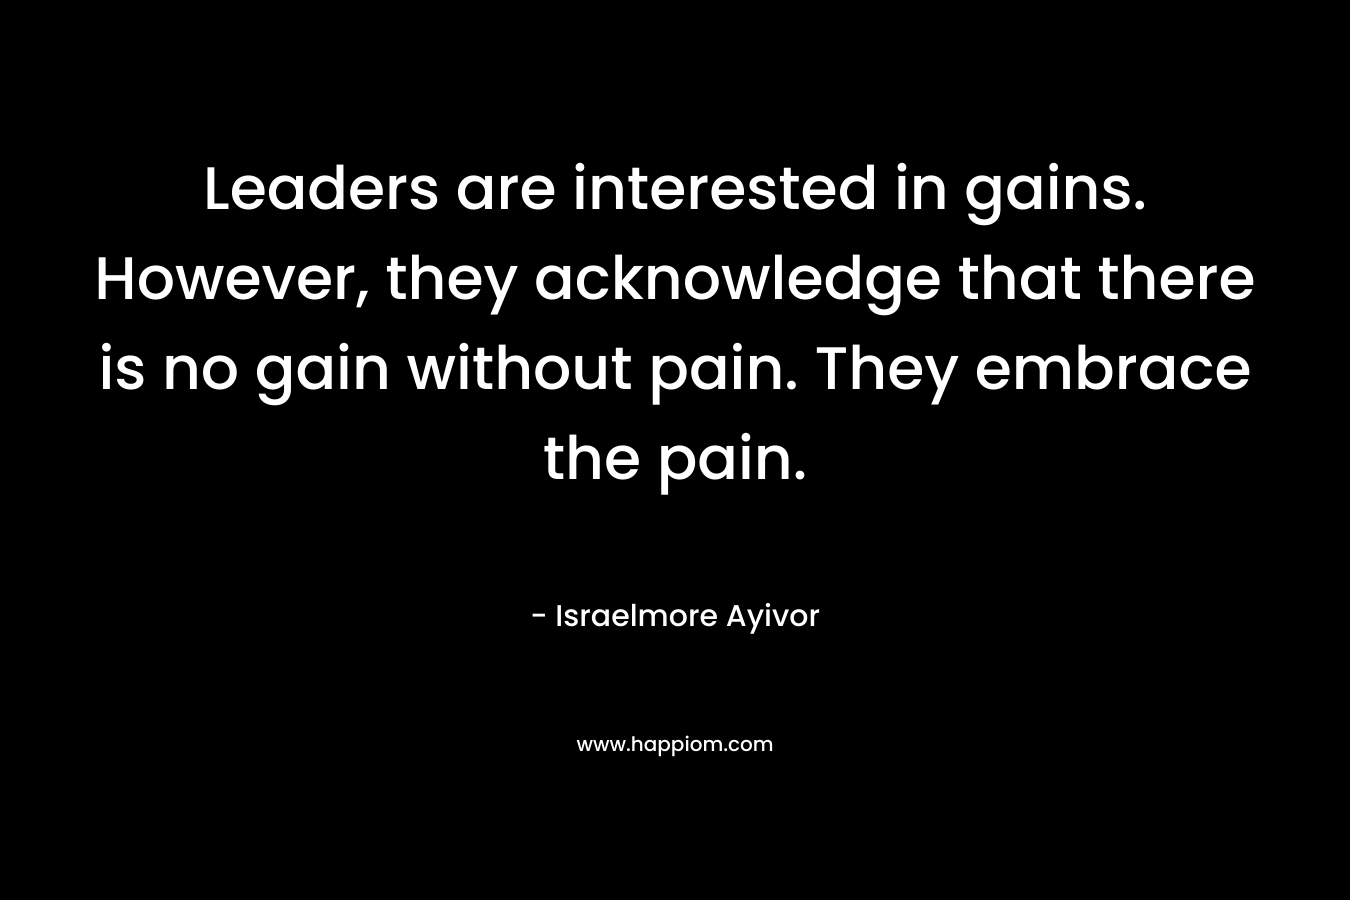 Leaders are interested in gains. However, they acknowledge that there is no gain without pain. They embrace the pain.